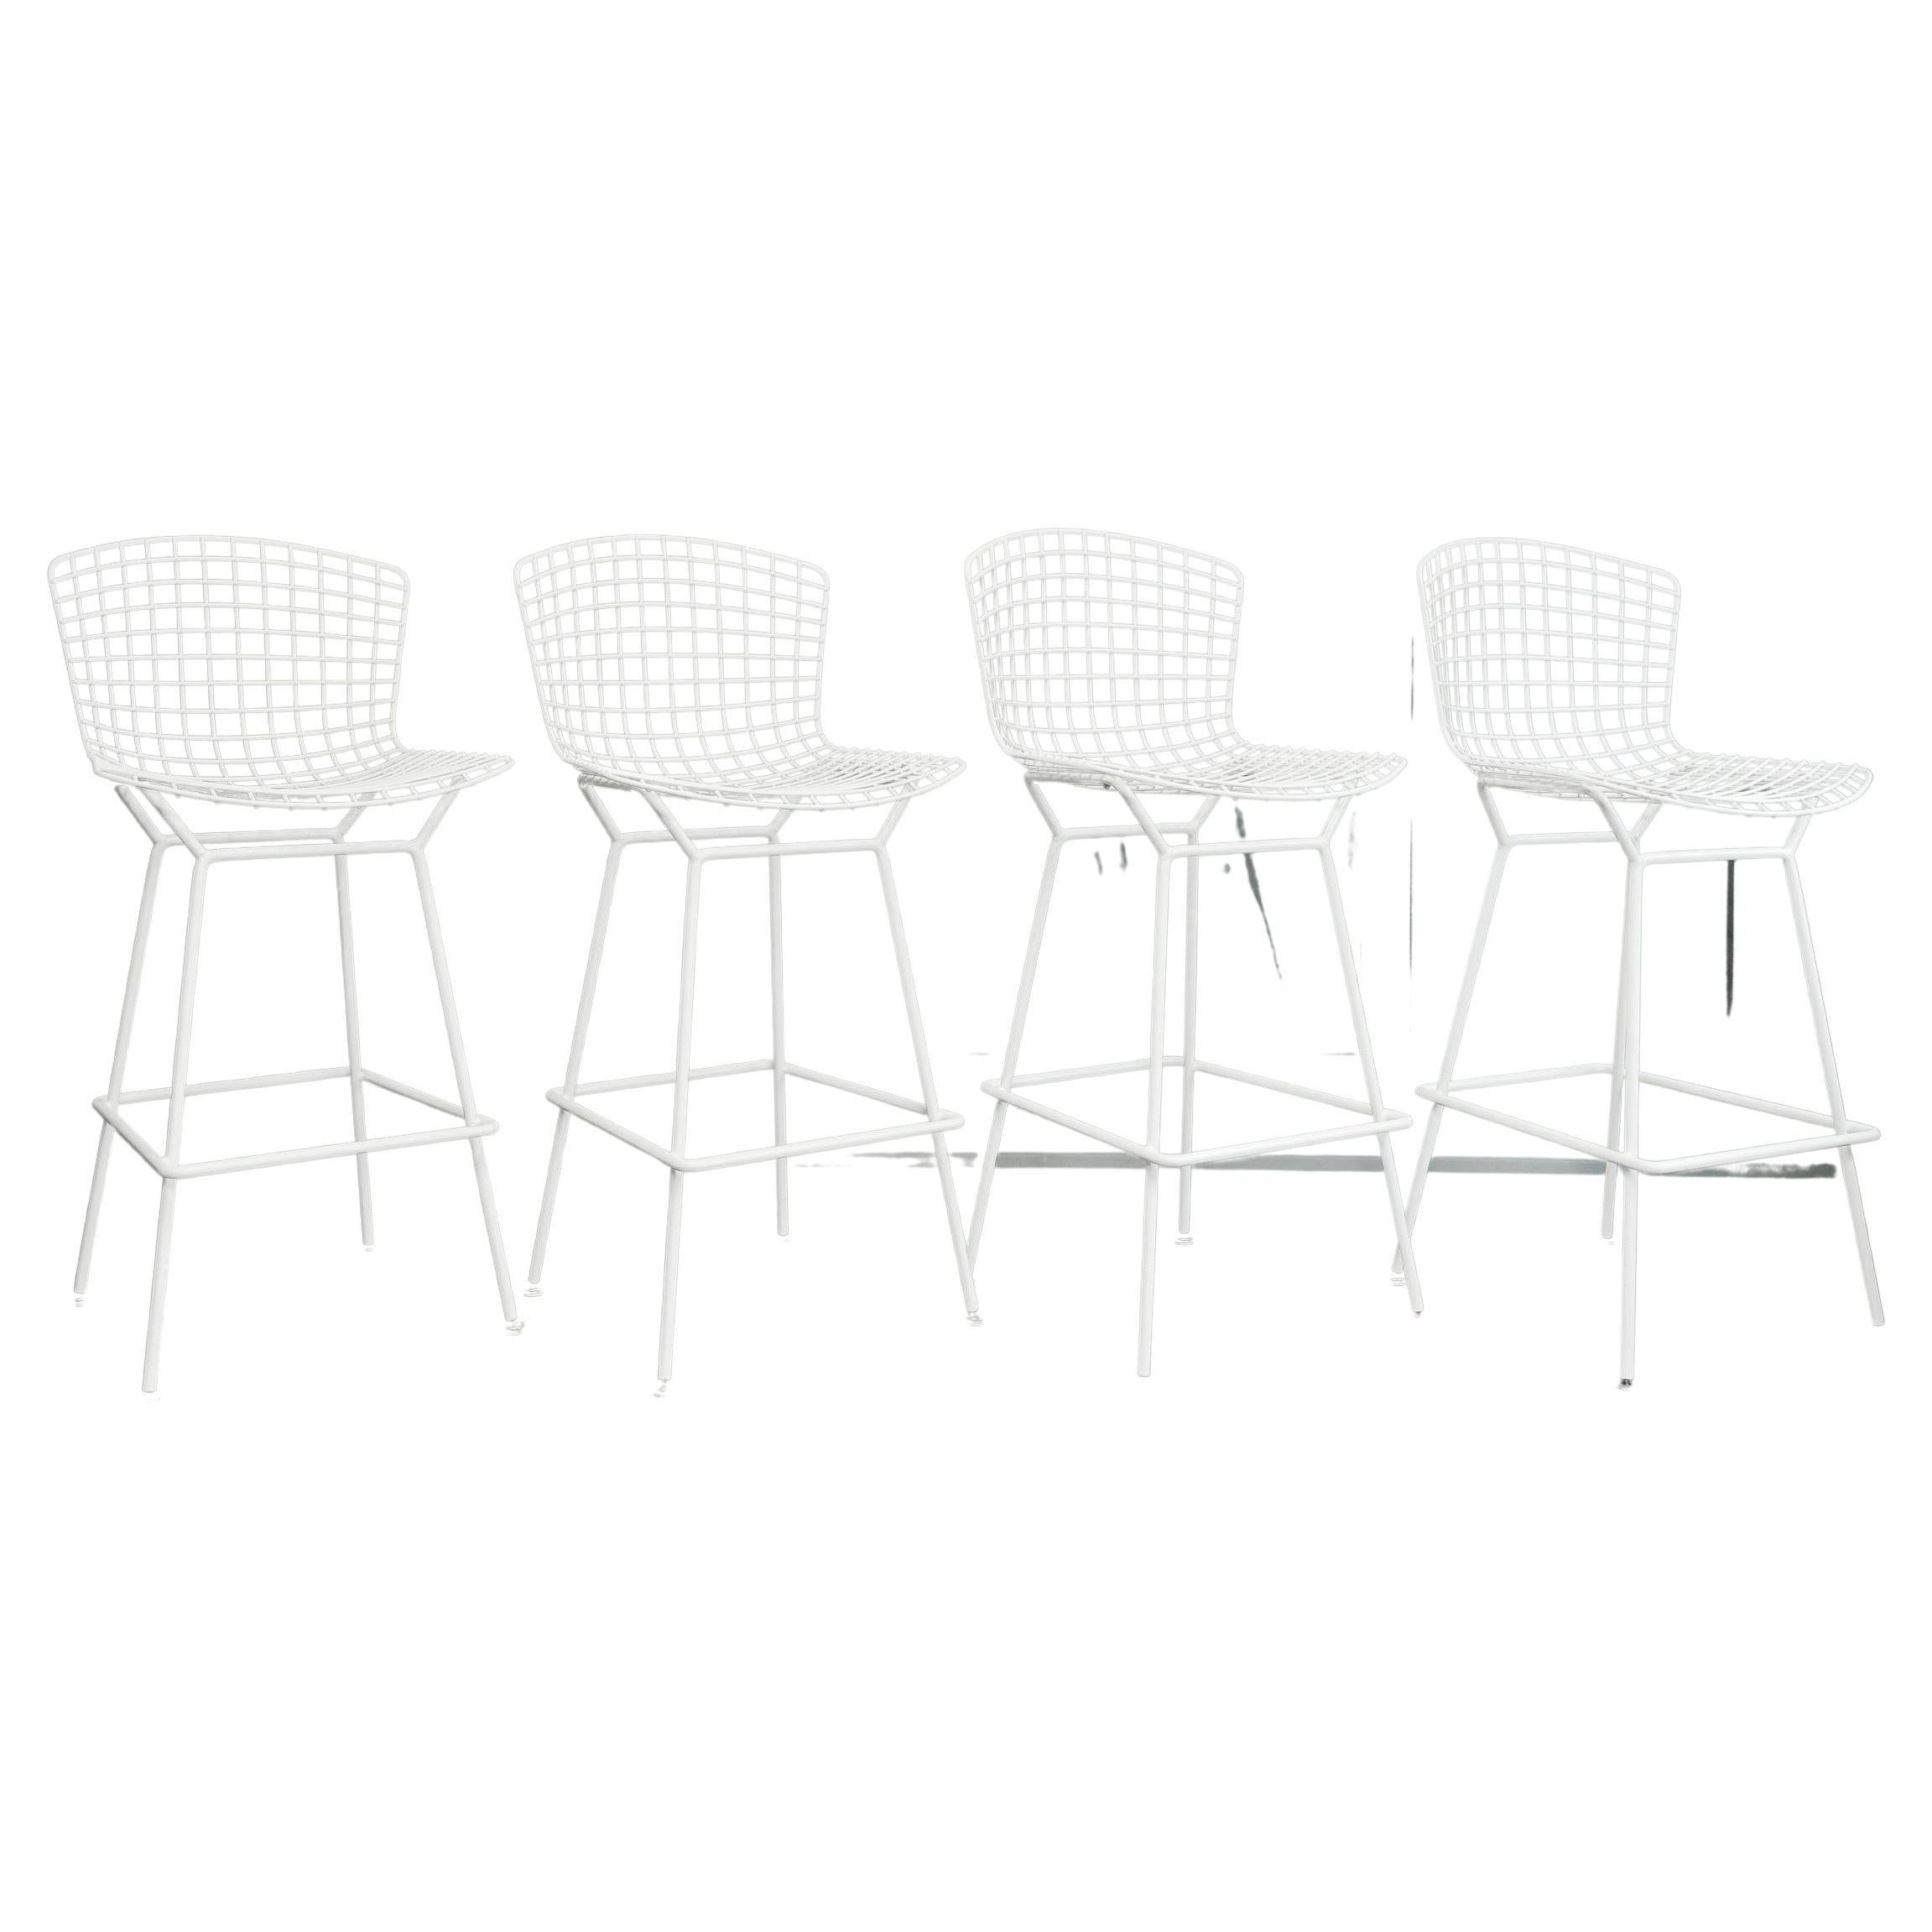 4 Wire Bar Stools by Harry Bertoia for Knoll